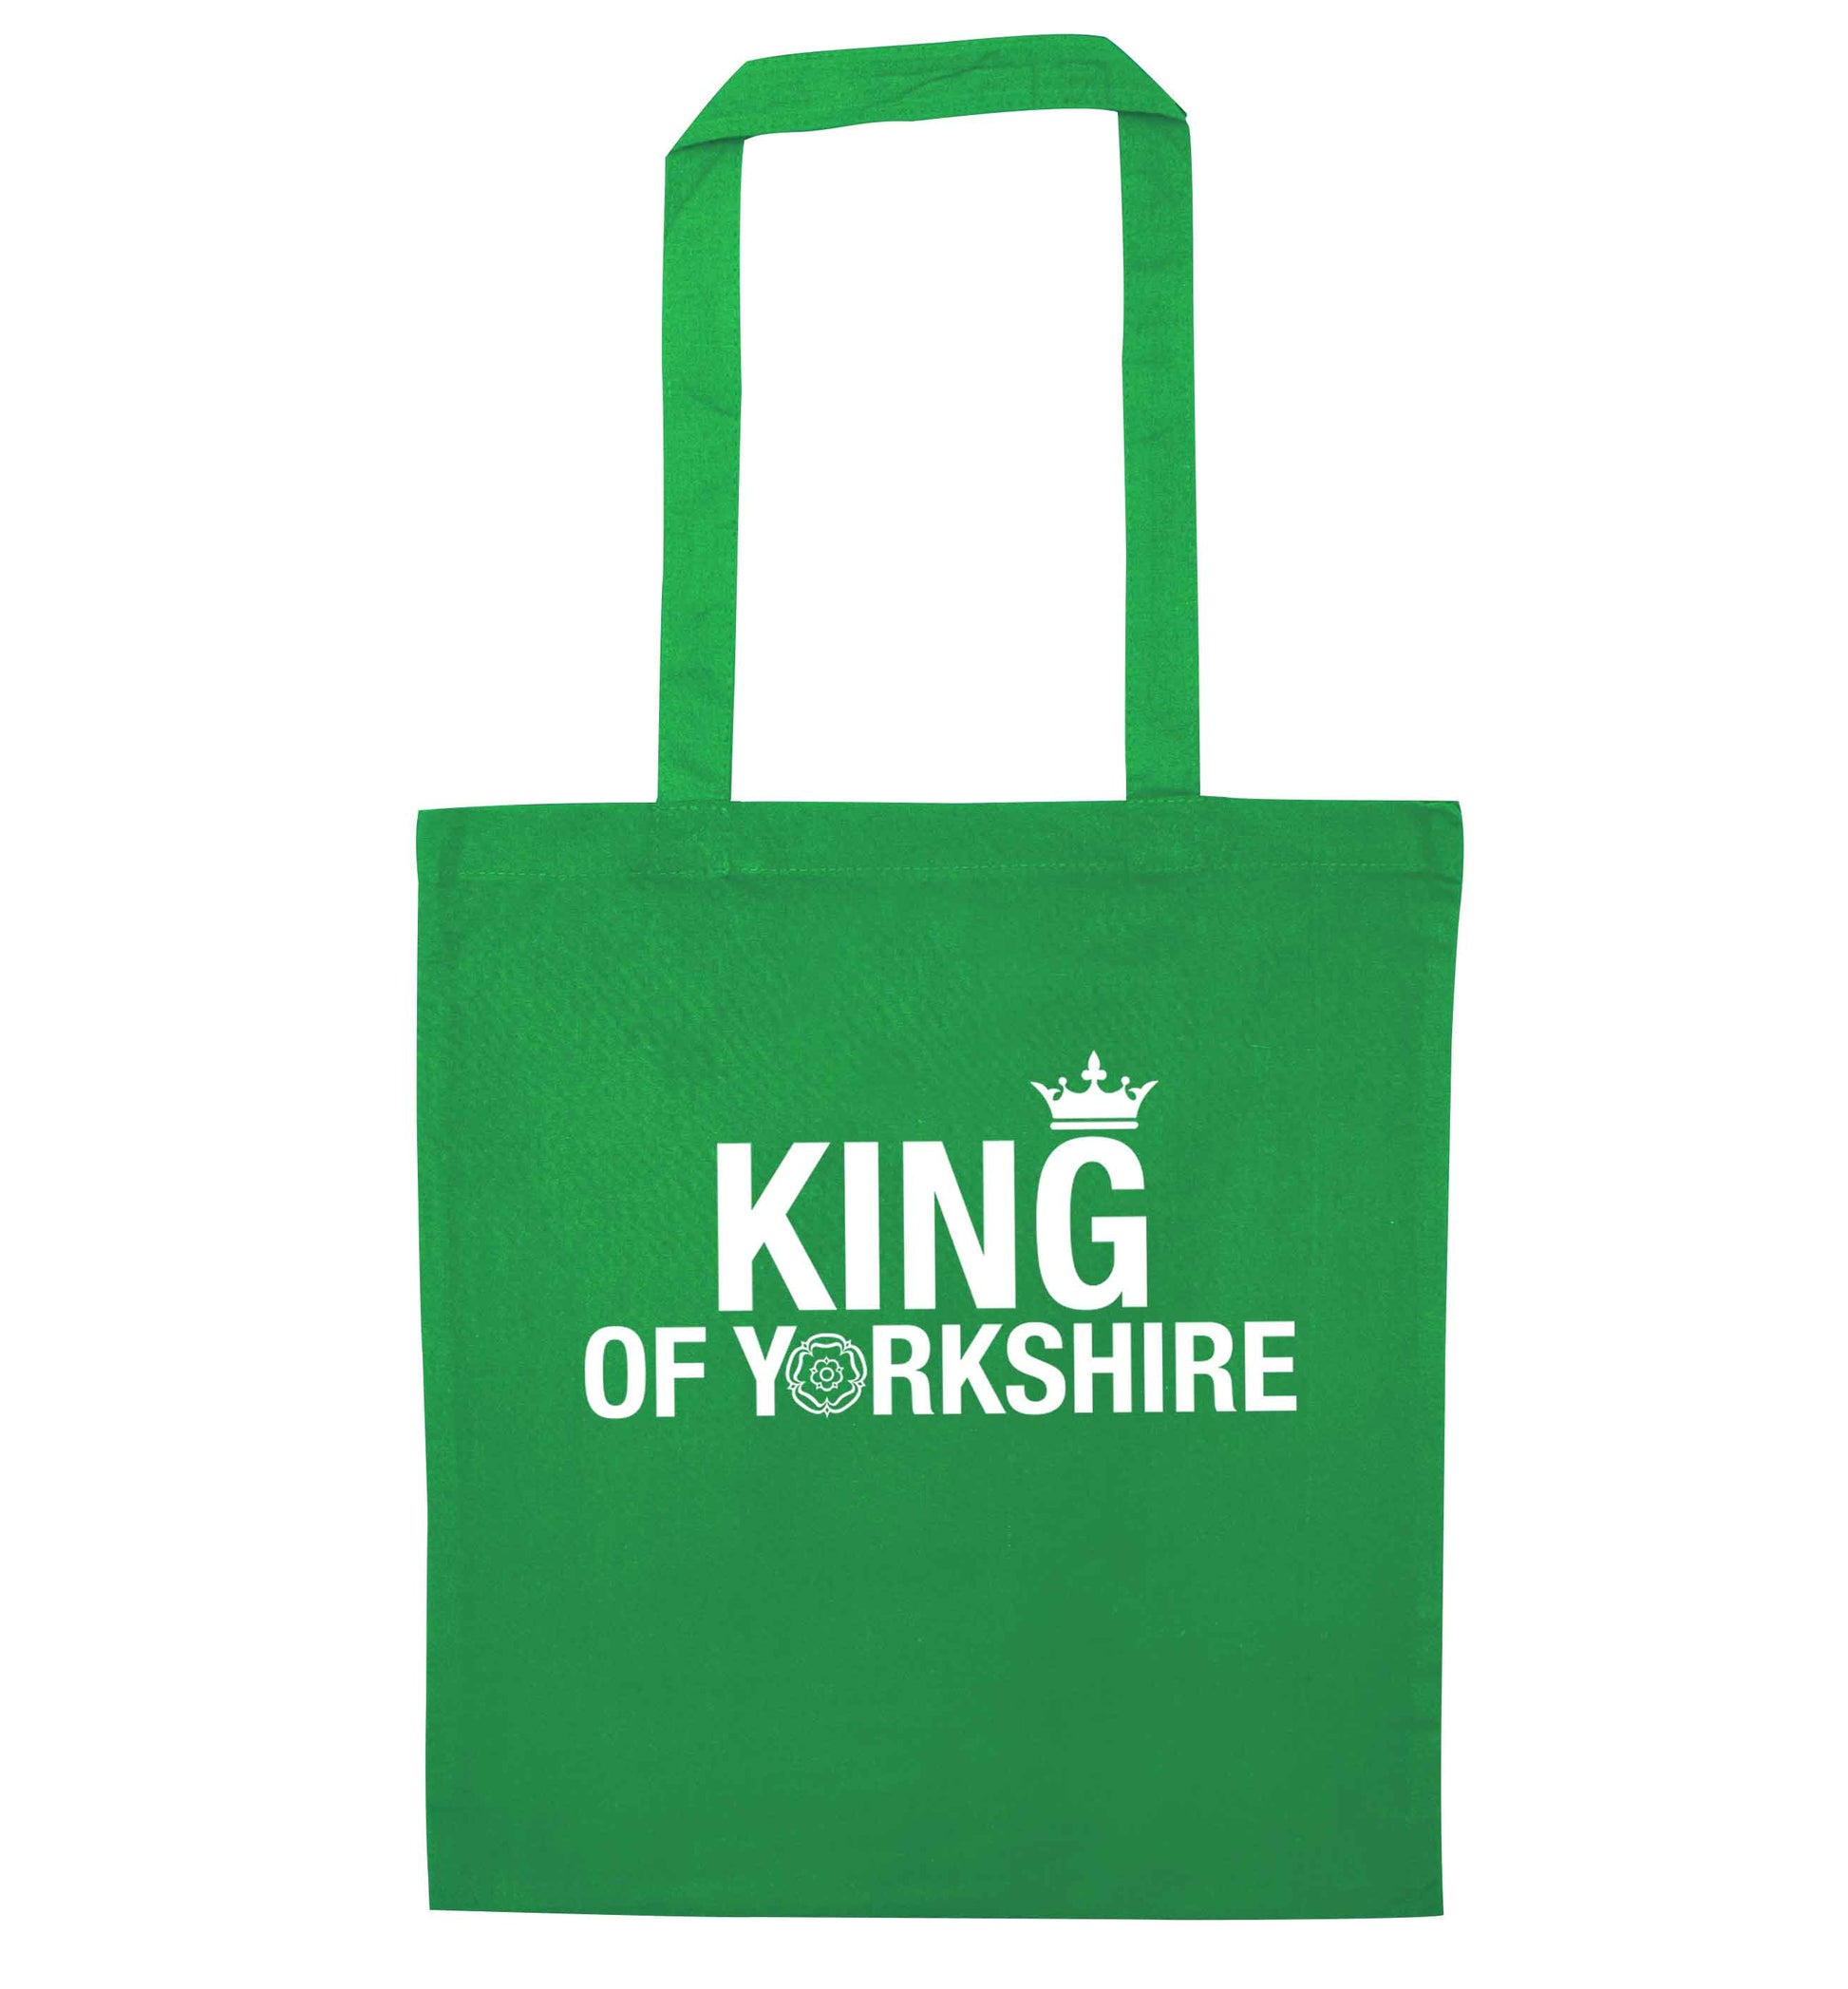 King of Yorkshire green tote bag